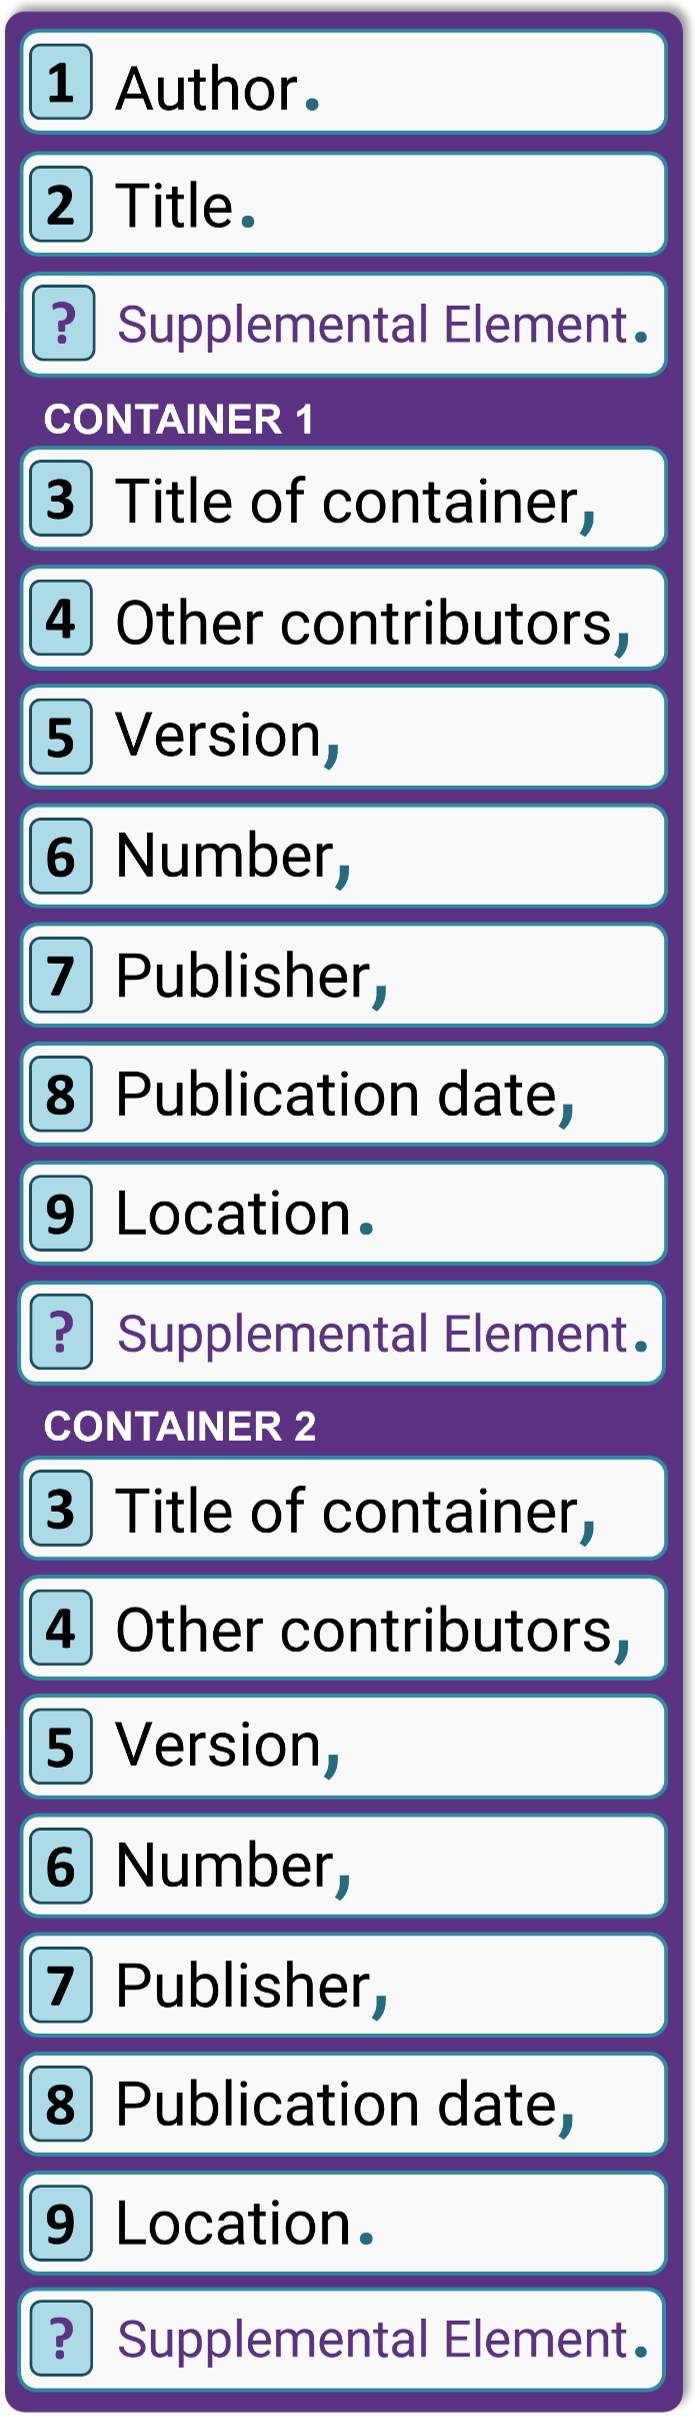 MLA core elements with 2 containers and 3 potential supplemental elements